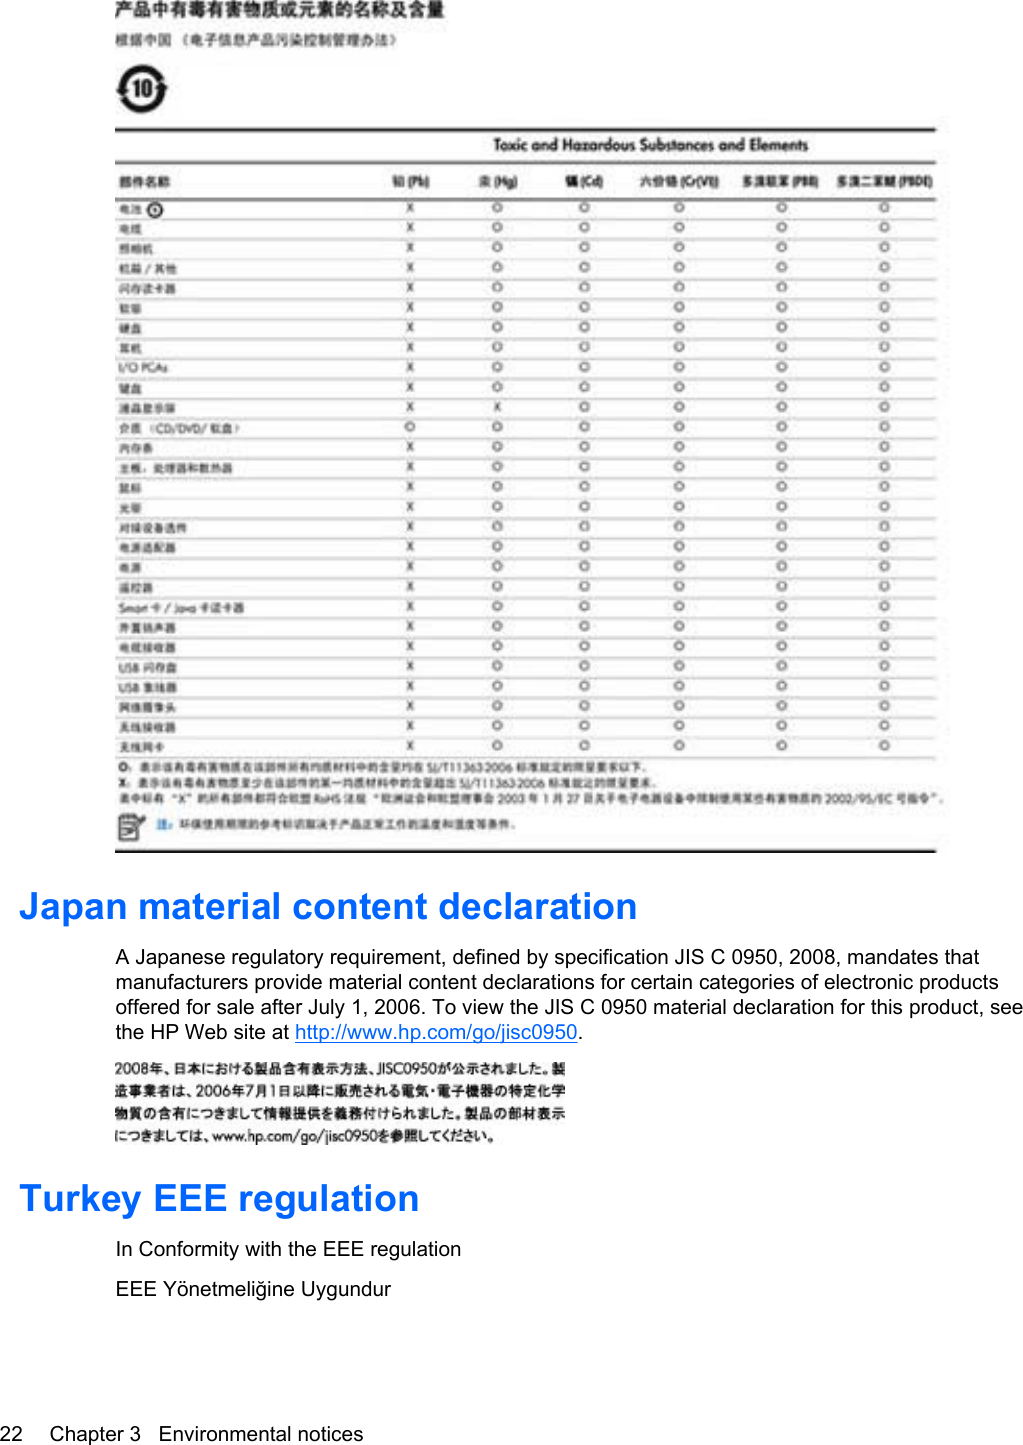 Japan material content declarationA Japanese regulatory requirement, defined by specification JIS C 0950, 2008, mandates thatmanufacturers provide material content declarations for certain categories of electronic productsoffered for sale after July 1, 2006. To view the JIS C 0950 material declaration for this product, seethe HP Web site at http://www.hp.com/go/jisc0950.Turkey EEE regulationIn Conformity with the EEE regulationEEE Yönetmeliğine Uygundur22 Chapter 3   Environmental notices